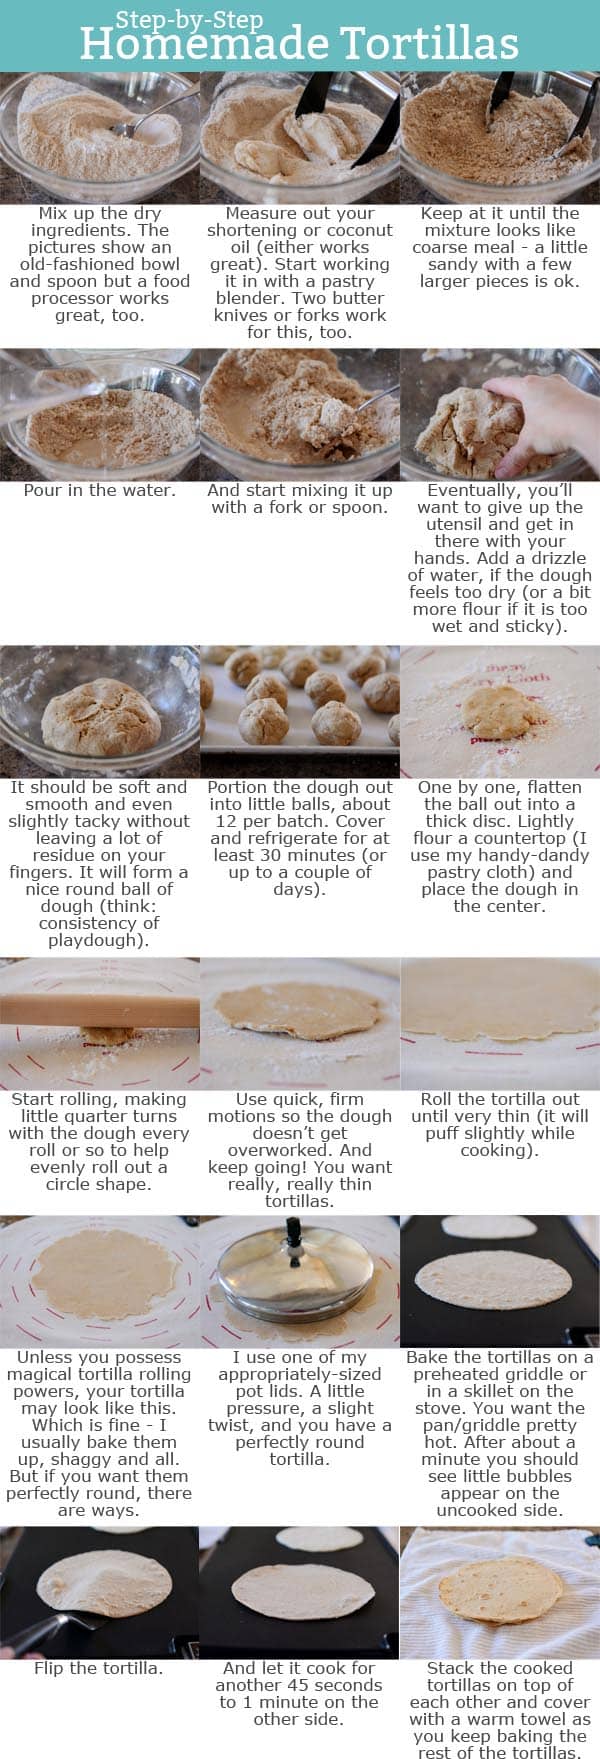 Pictures and instructions showing how to make homemade tortillas.